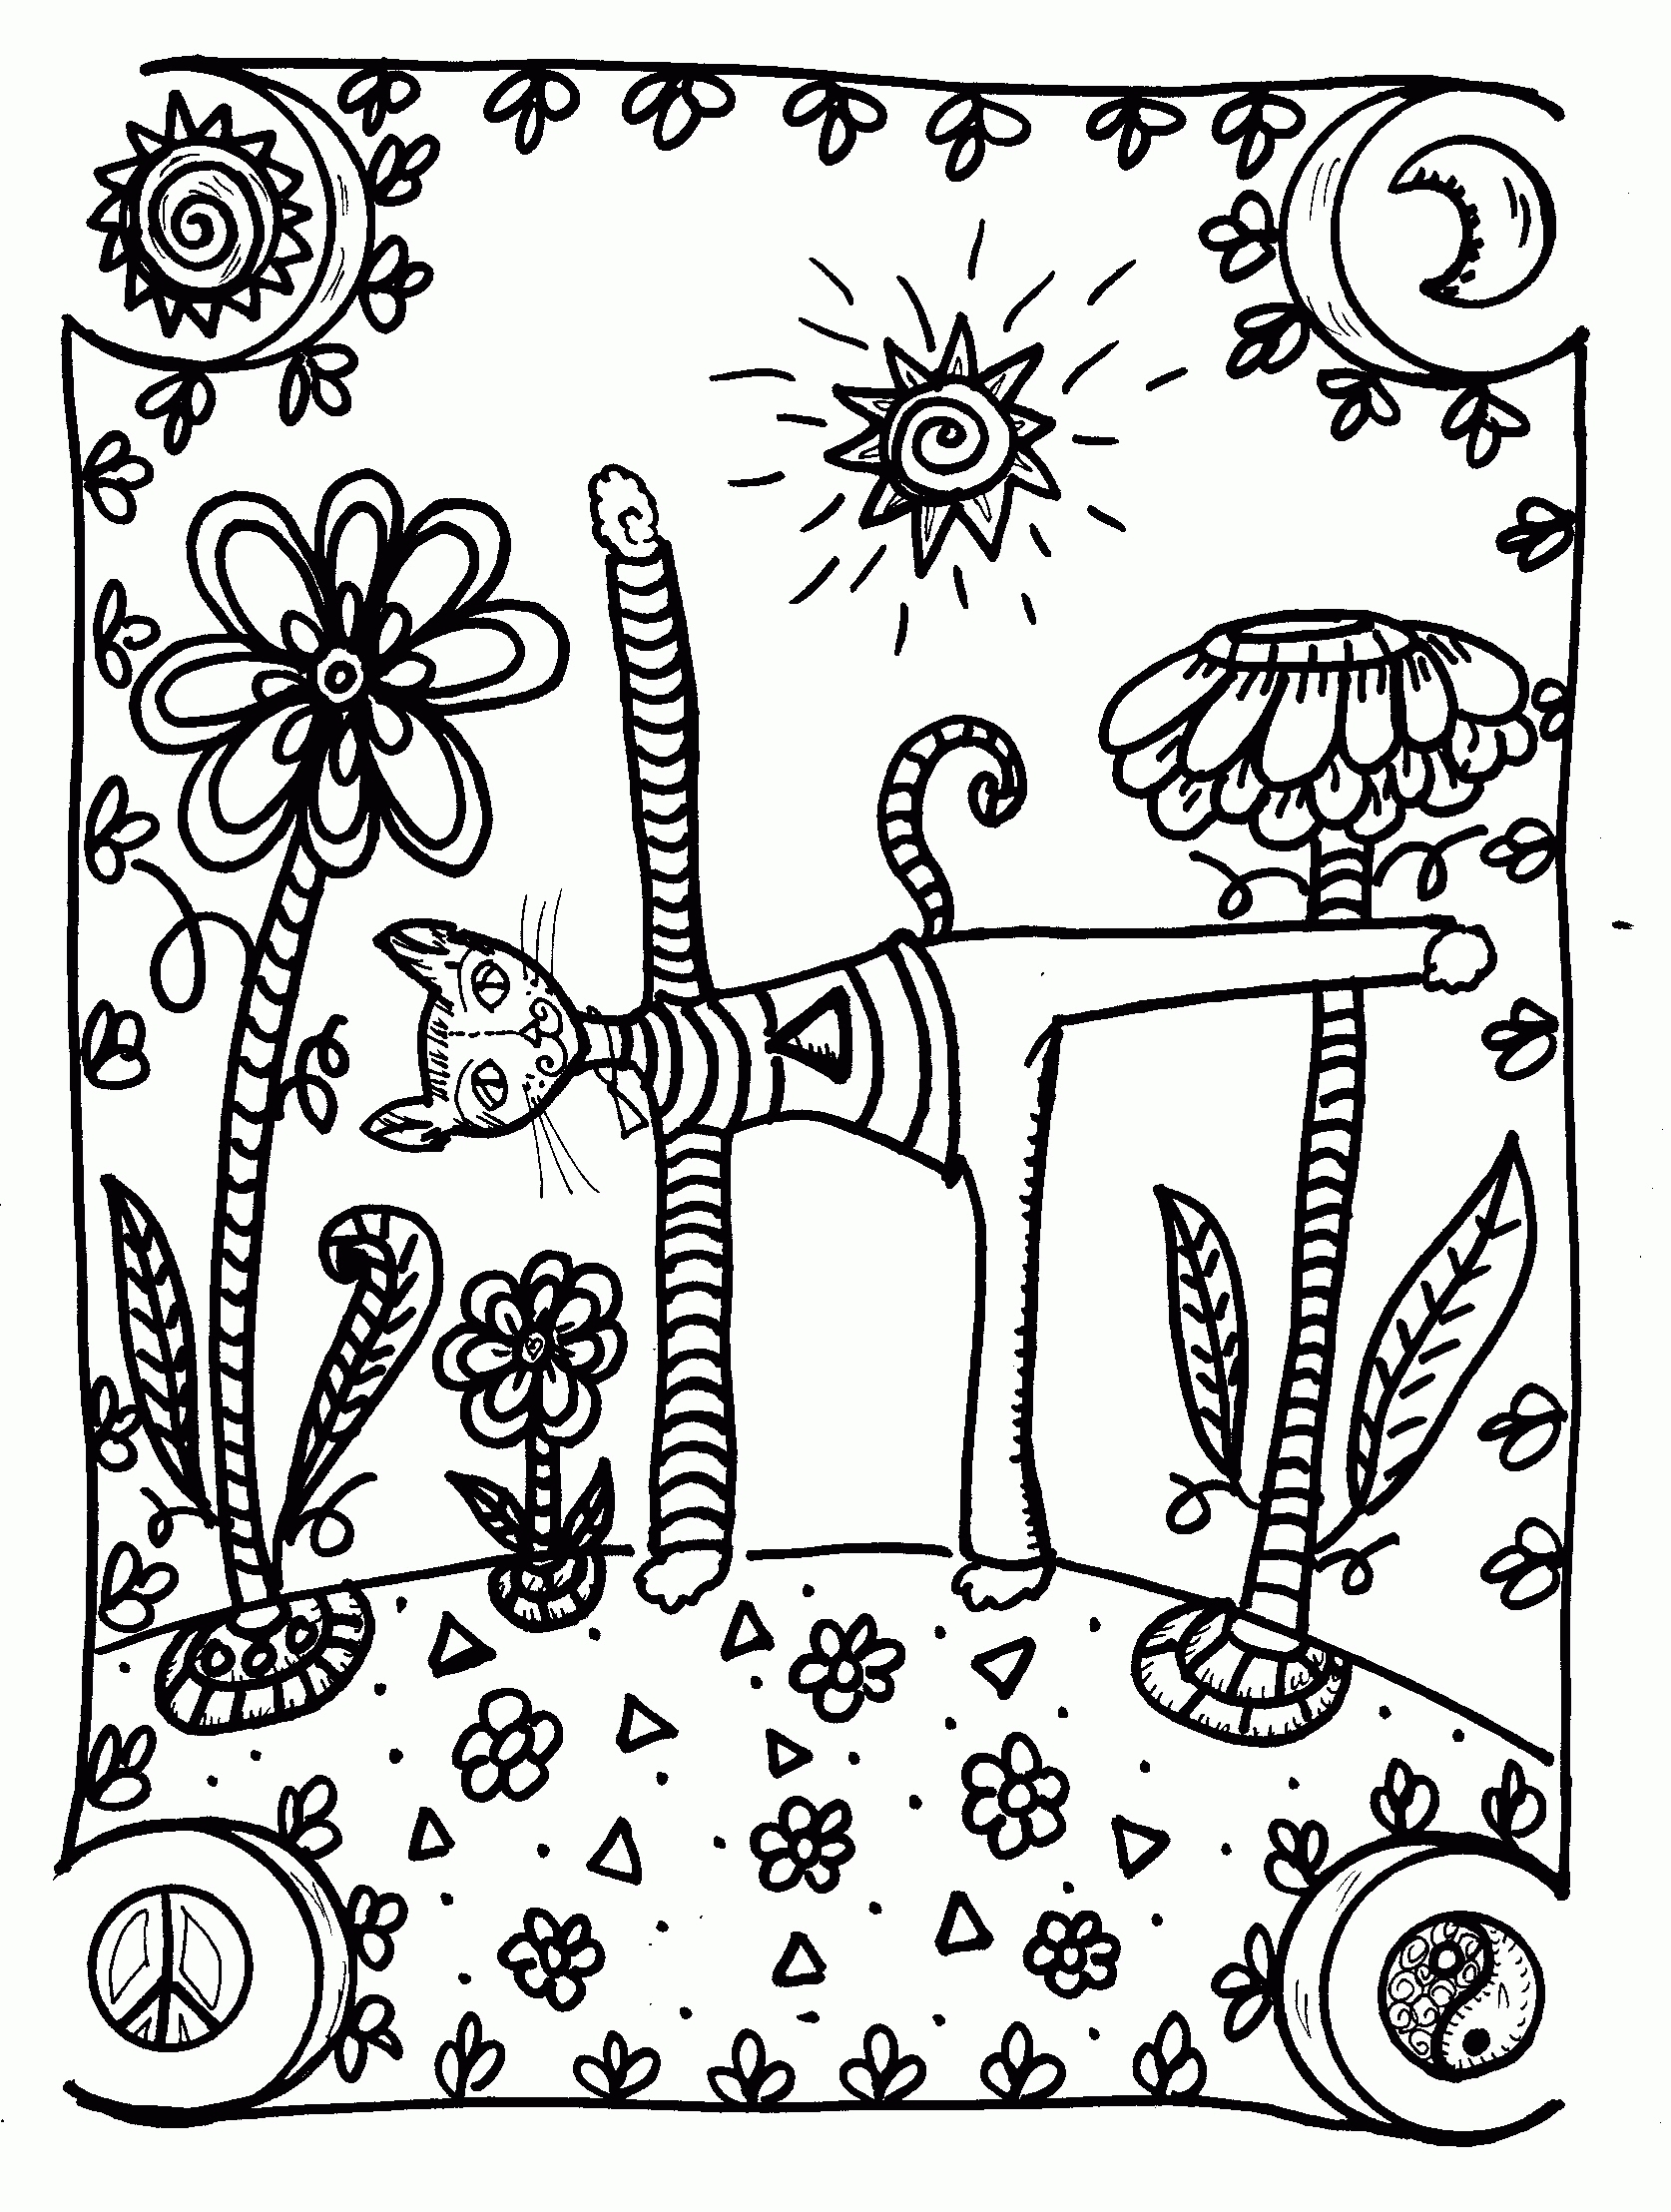 Yoga Cat Coloring Page